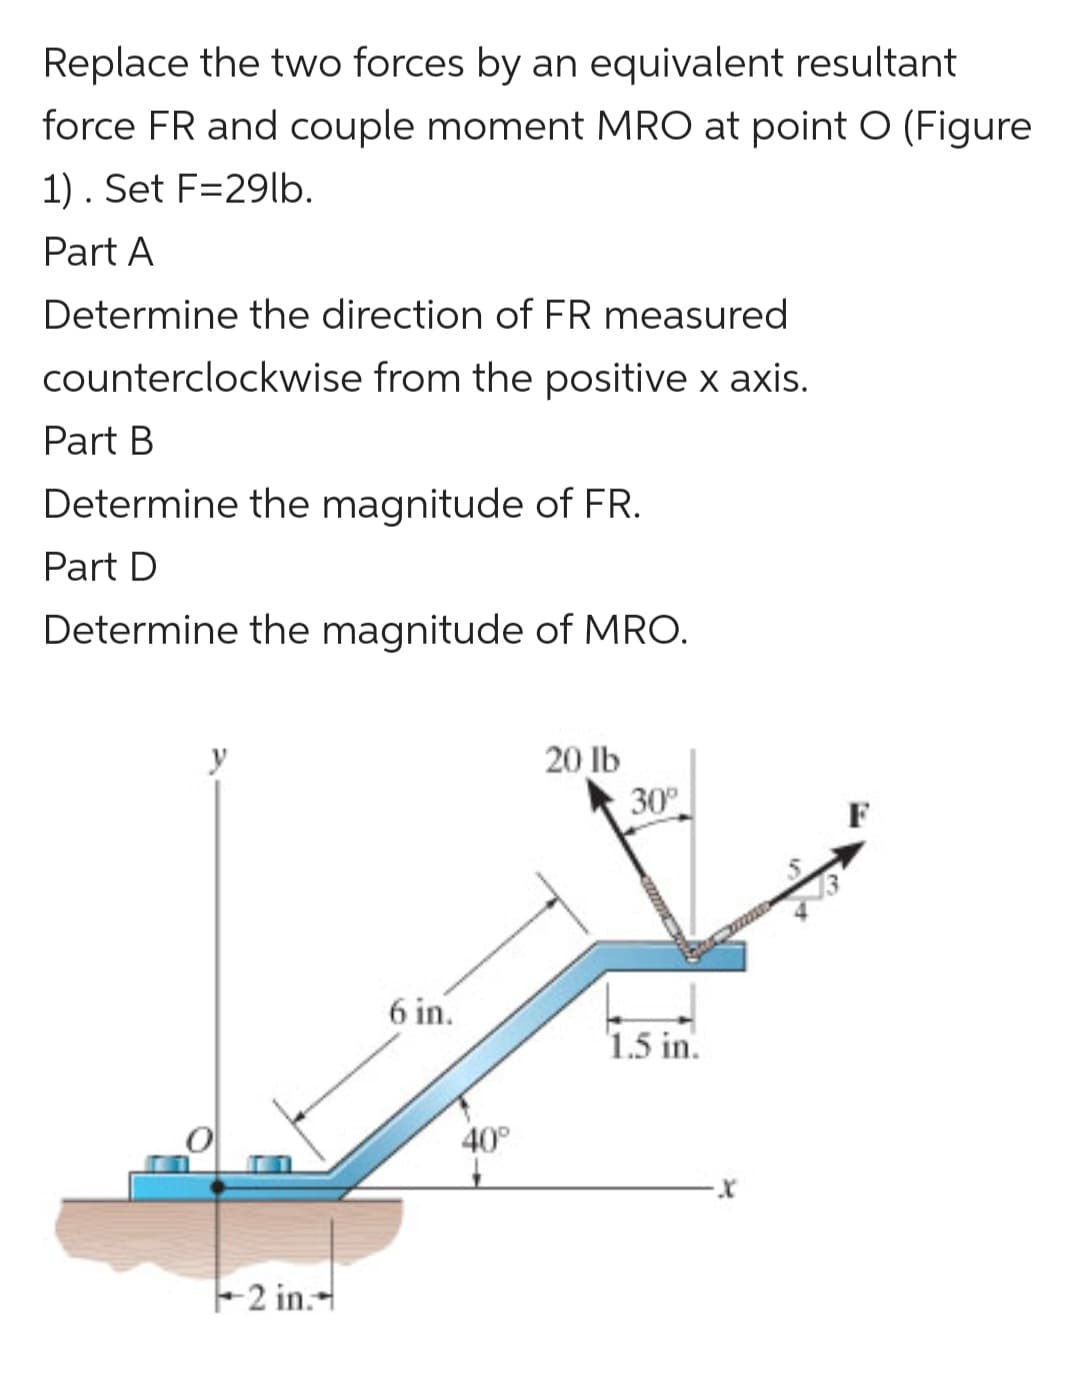 Replace the two forces by an equivalent resultant
force FR and couple moment MRO at point O (Figure
1). Set F=29lb.
Part A
Determine the direction of FR measured
counterclockwise from the positive x axis.
Part B
Determine the magnitude of FR.
Part D
Determine the magnitude of MRO.
2 in.--
6 in.
40°
20 lb
30°
1.5 in.
X